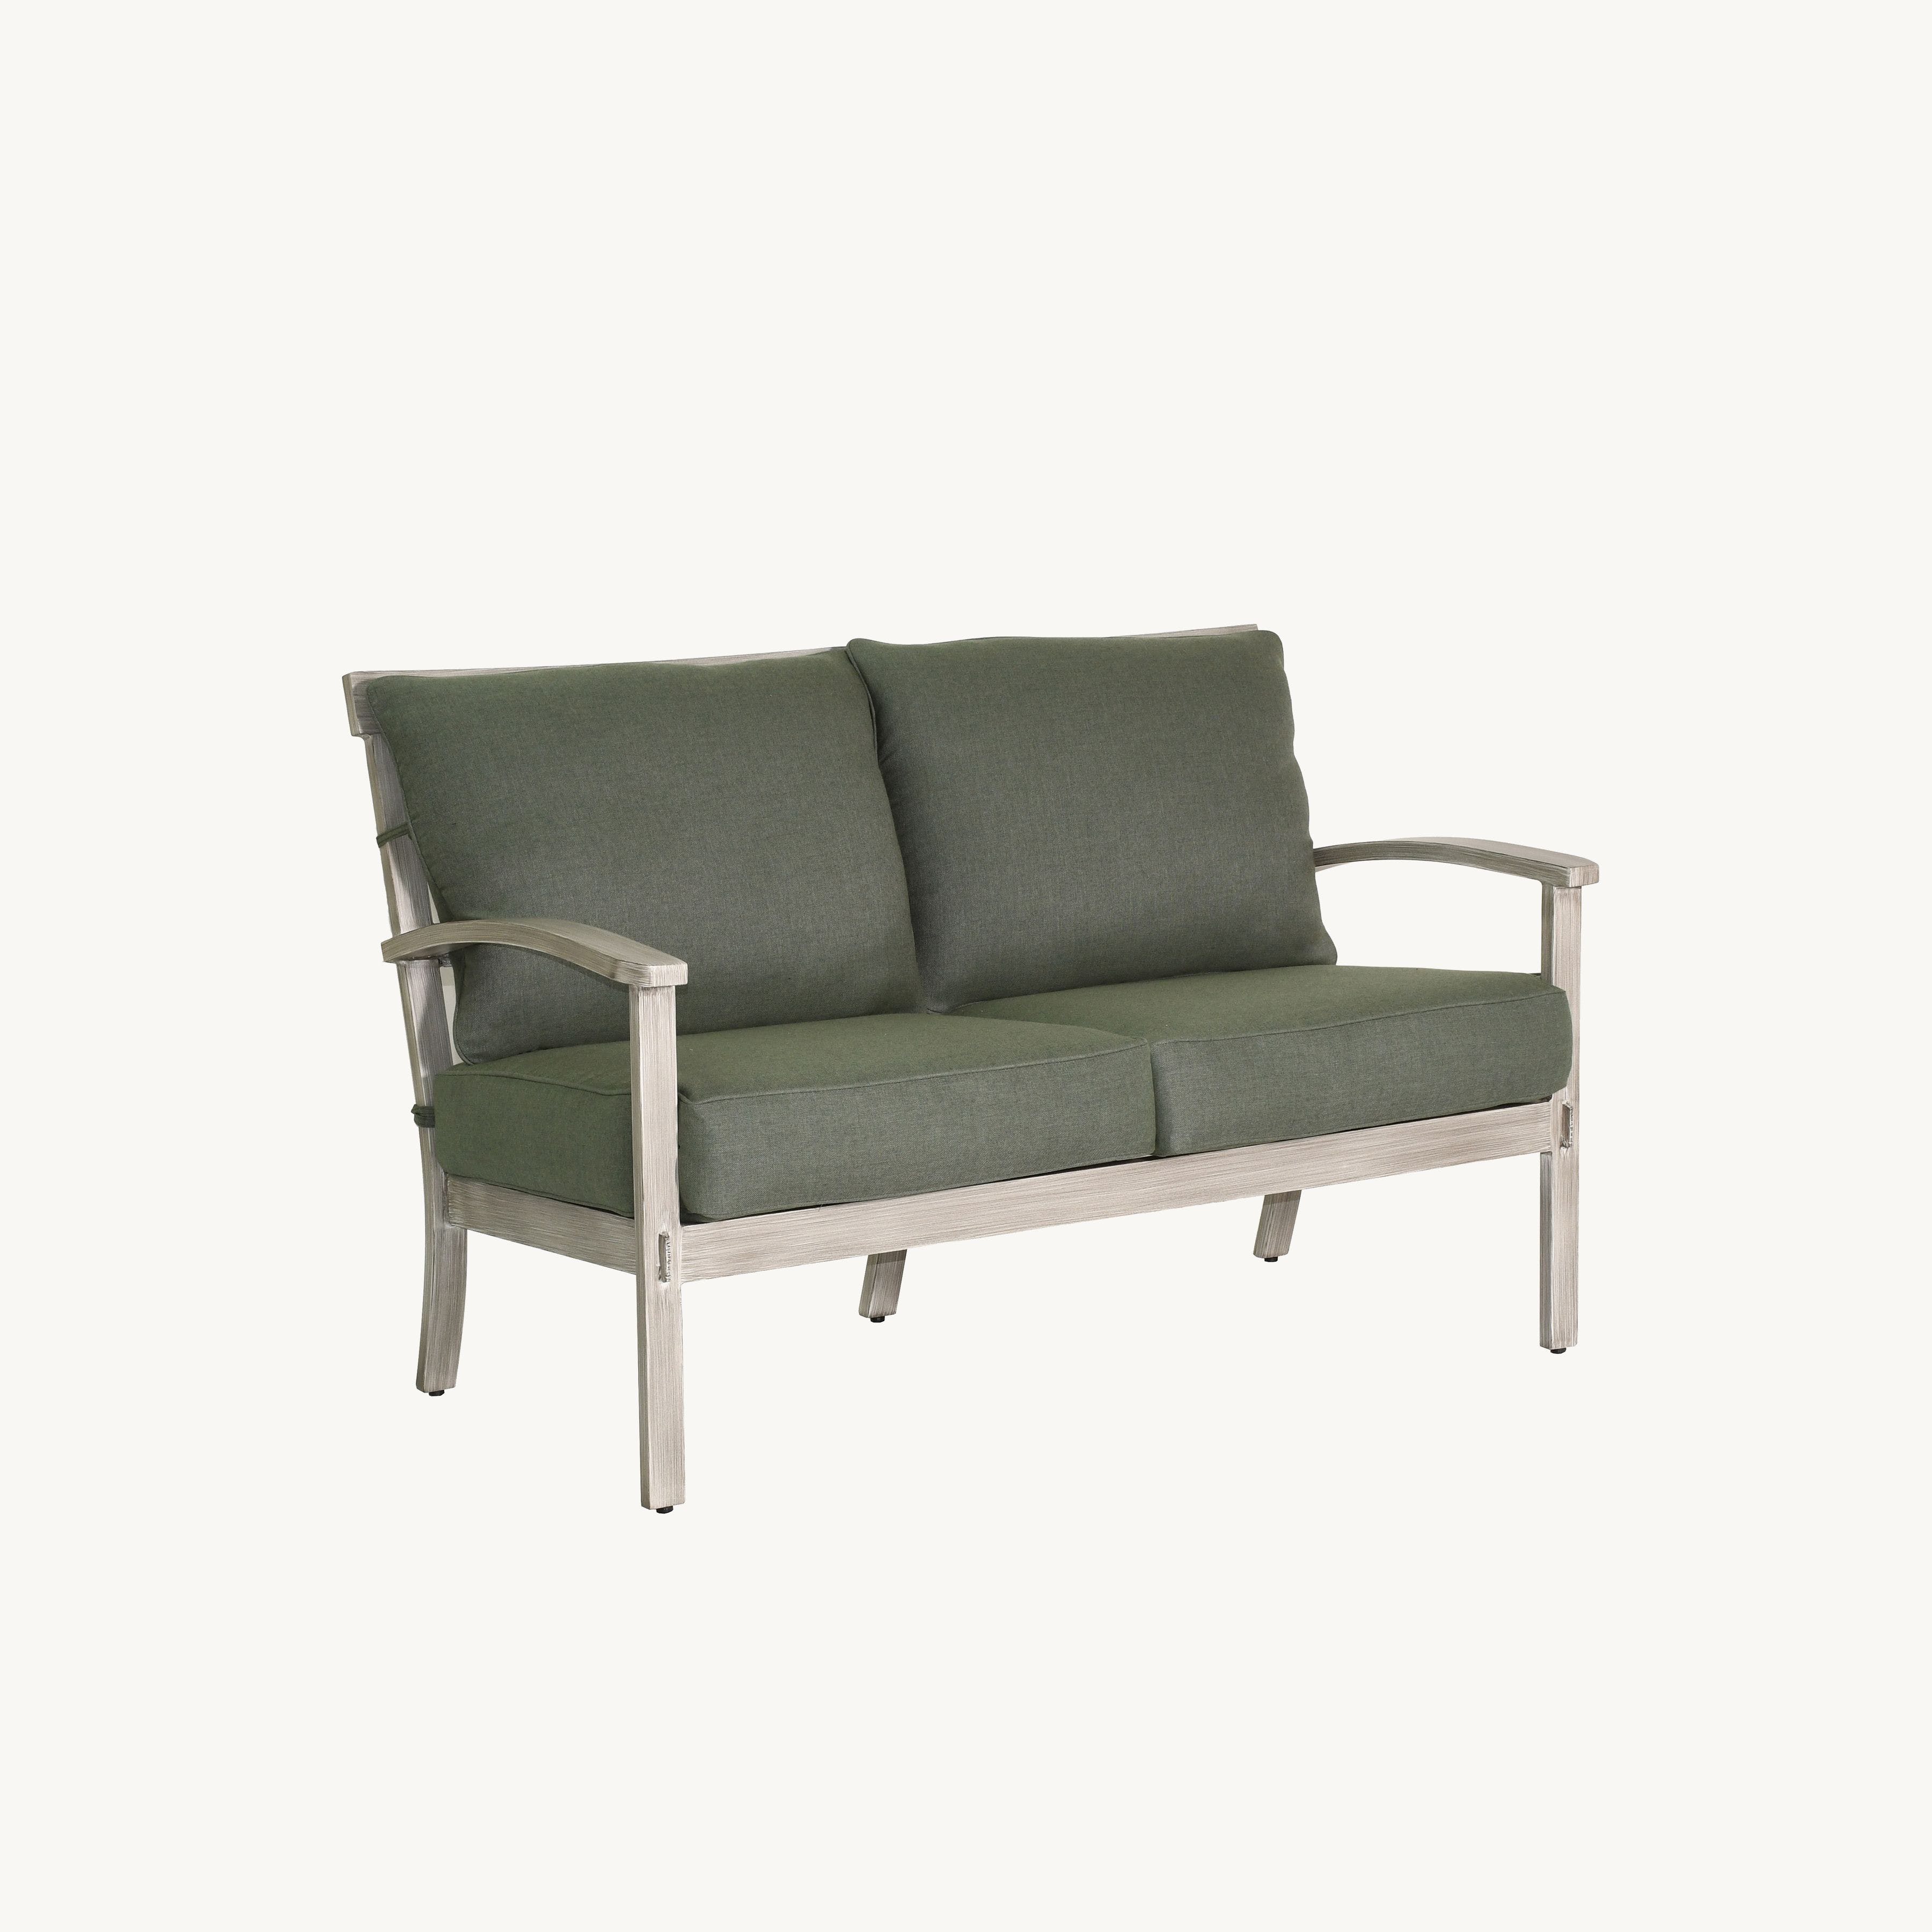 Antler Hill Cushioned Loveseat By Castelle